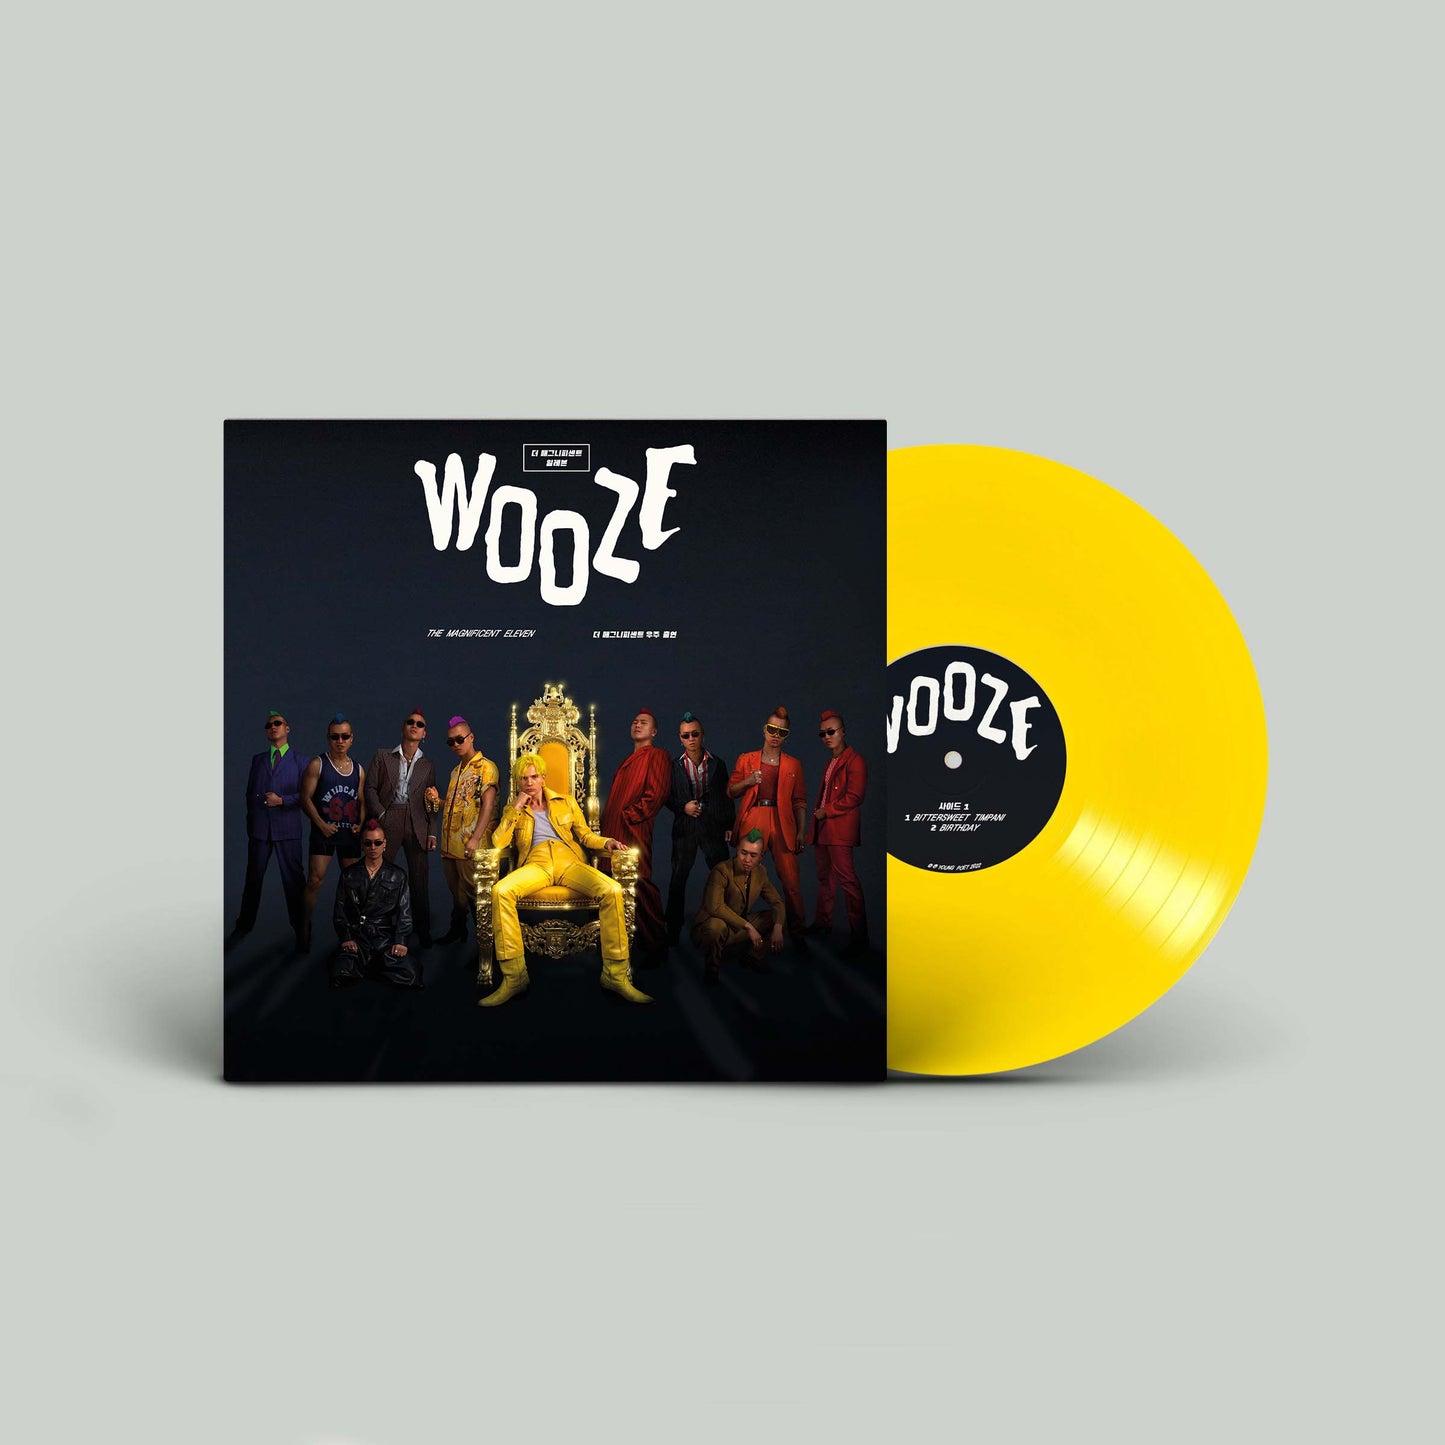 WOOZE - The Magnificent Eleven Vinyl (Signed Copy) - Pre-Order